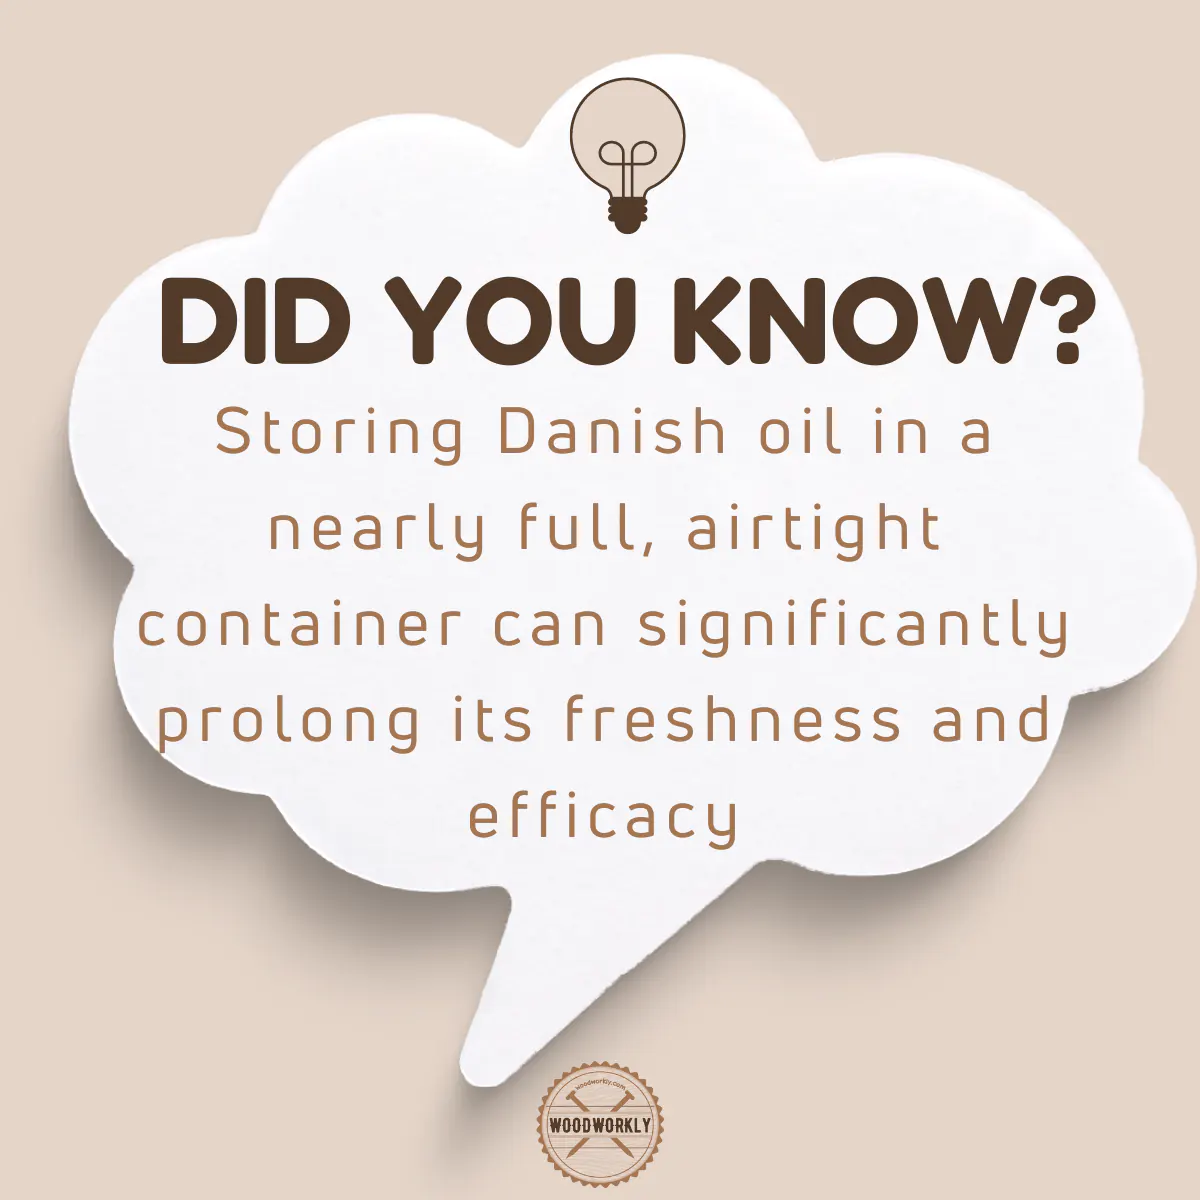 Did you know fact about keeping Danish oil fresh